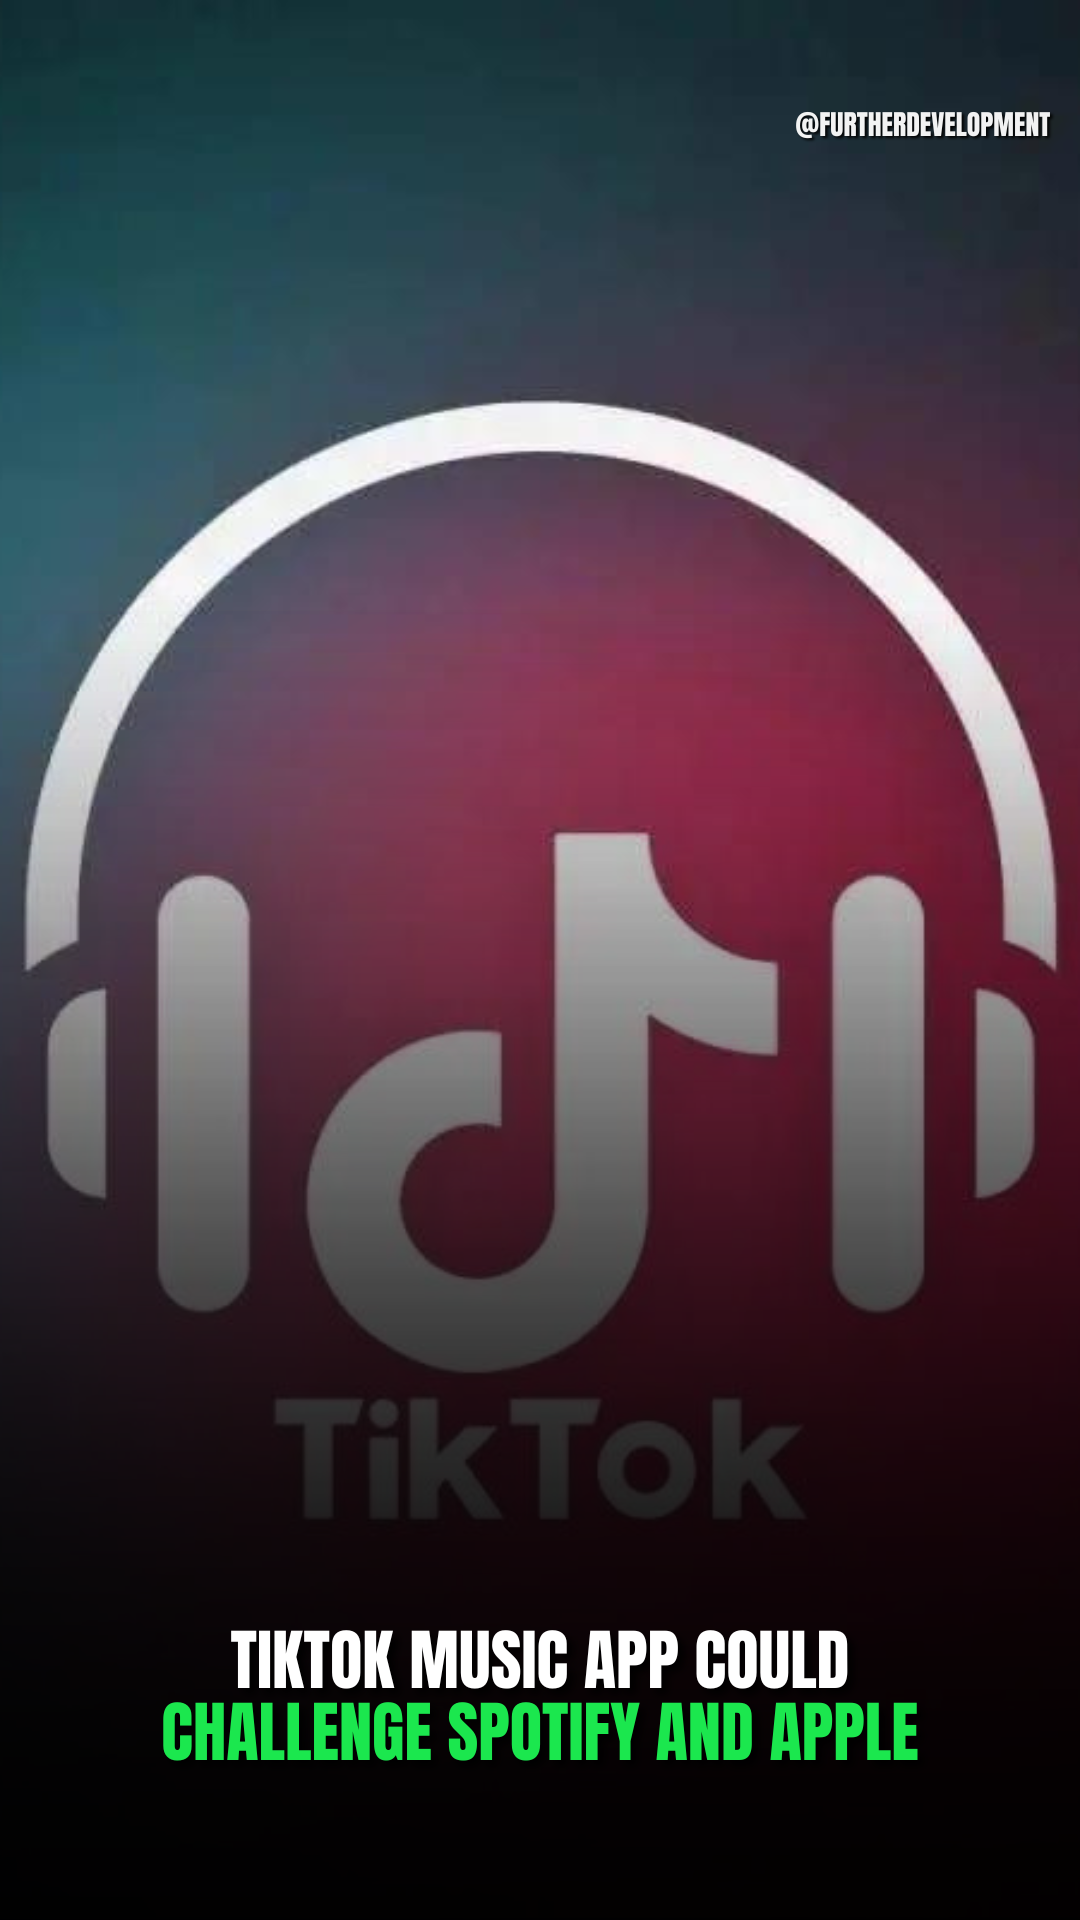 TIKTOK MUSIC APP COULD CHALLENGE SPOTIFY AND APPLE